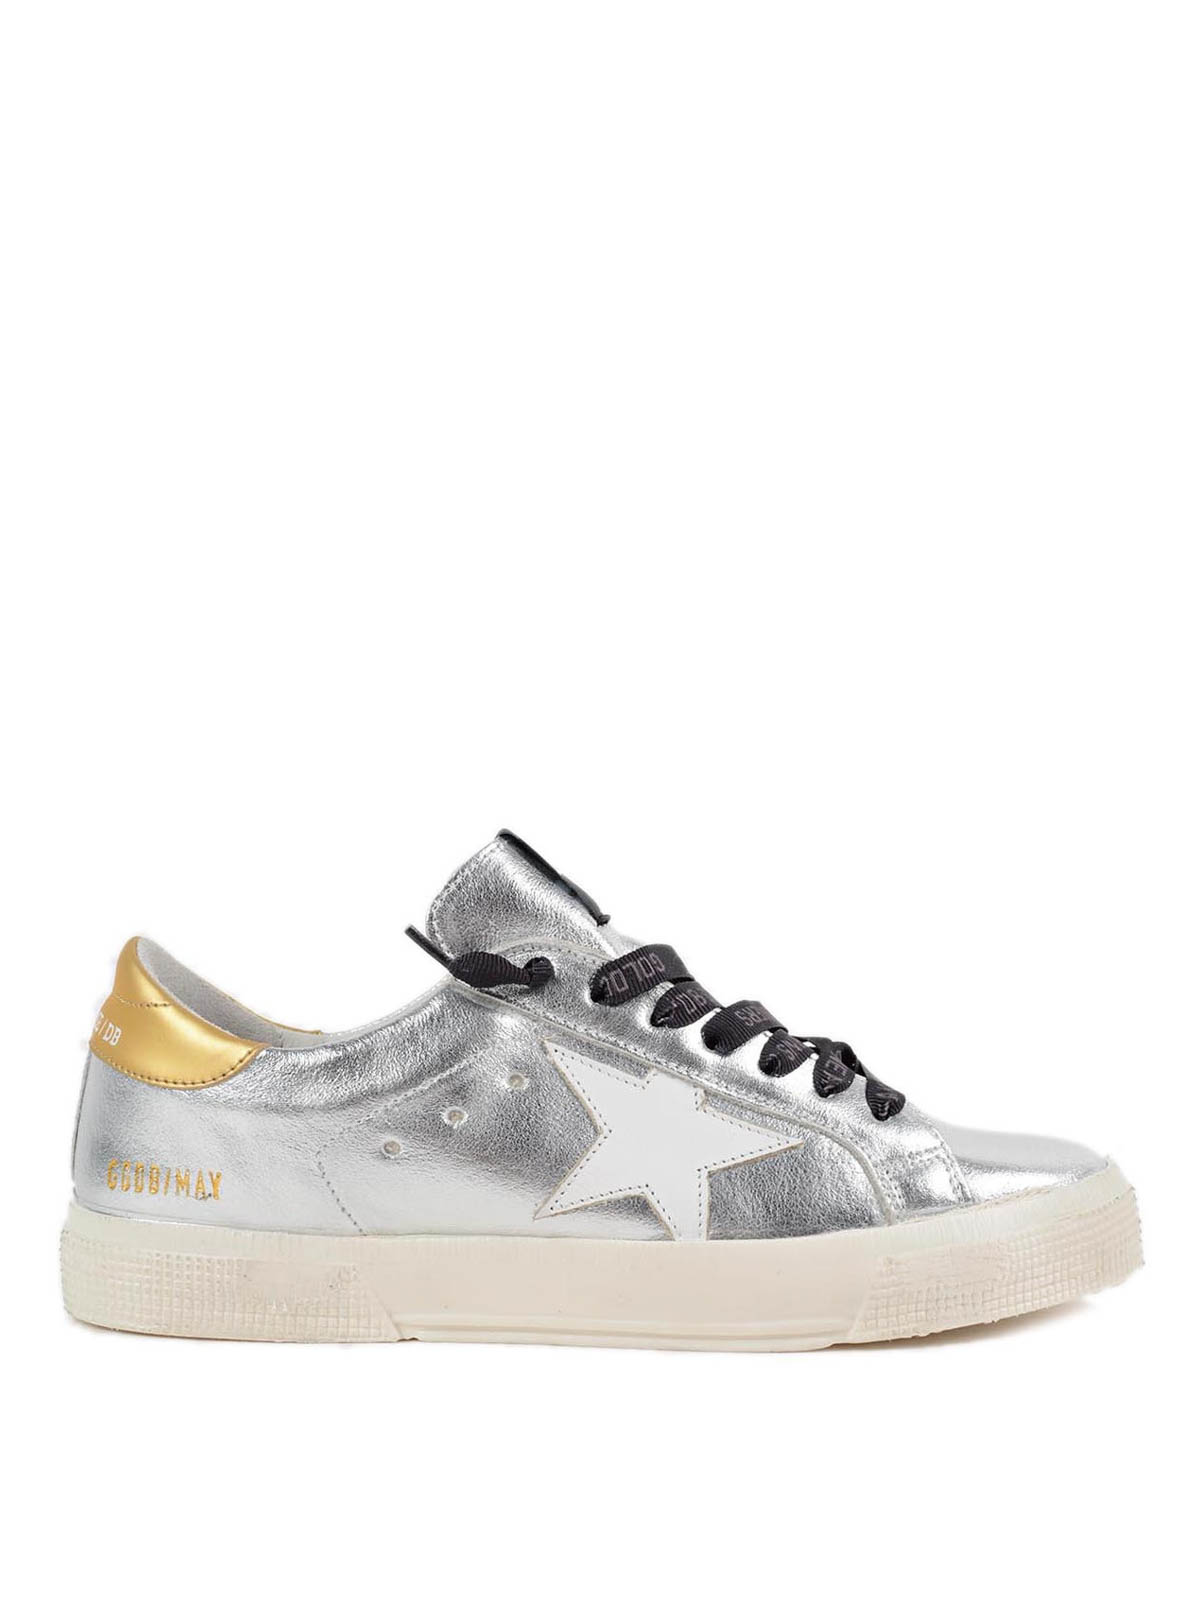 Trainers Golden Goose - May leather sneakers - G28WS127E11 | iKRIX.com